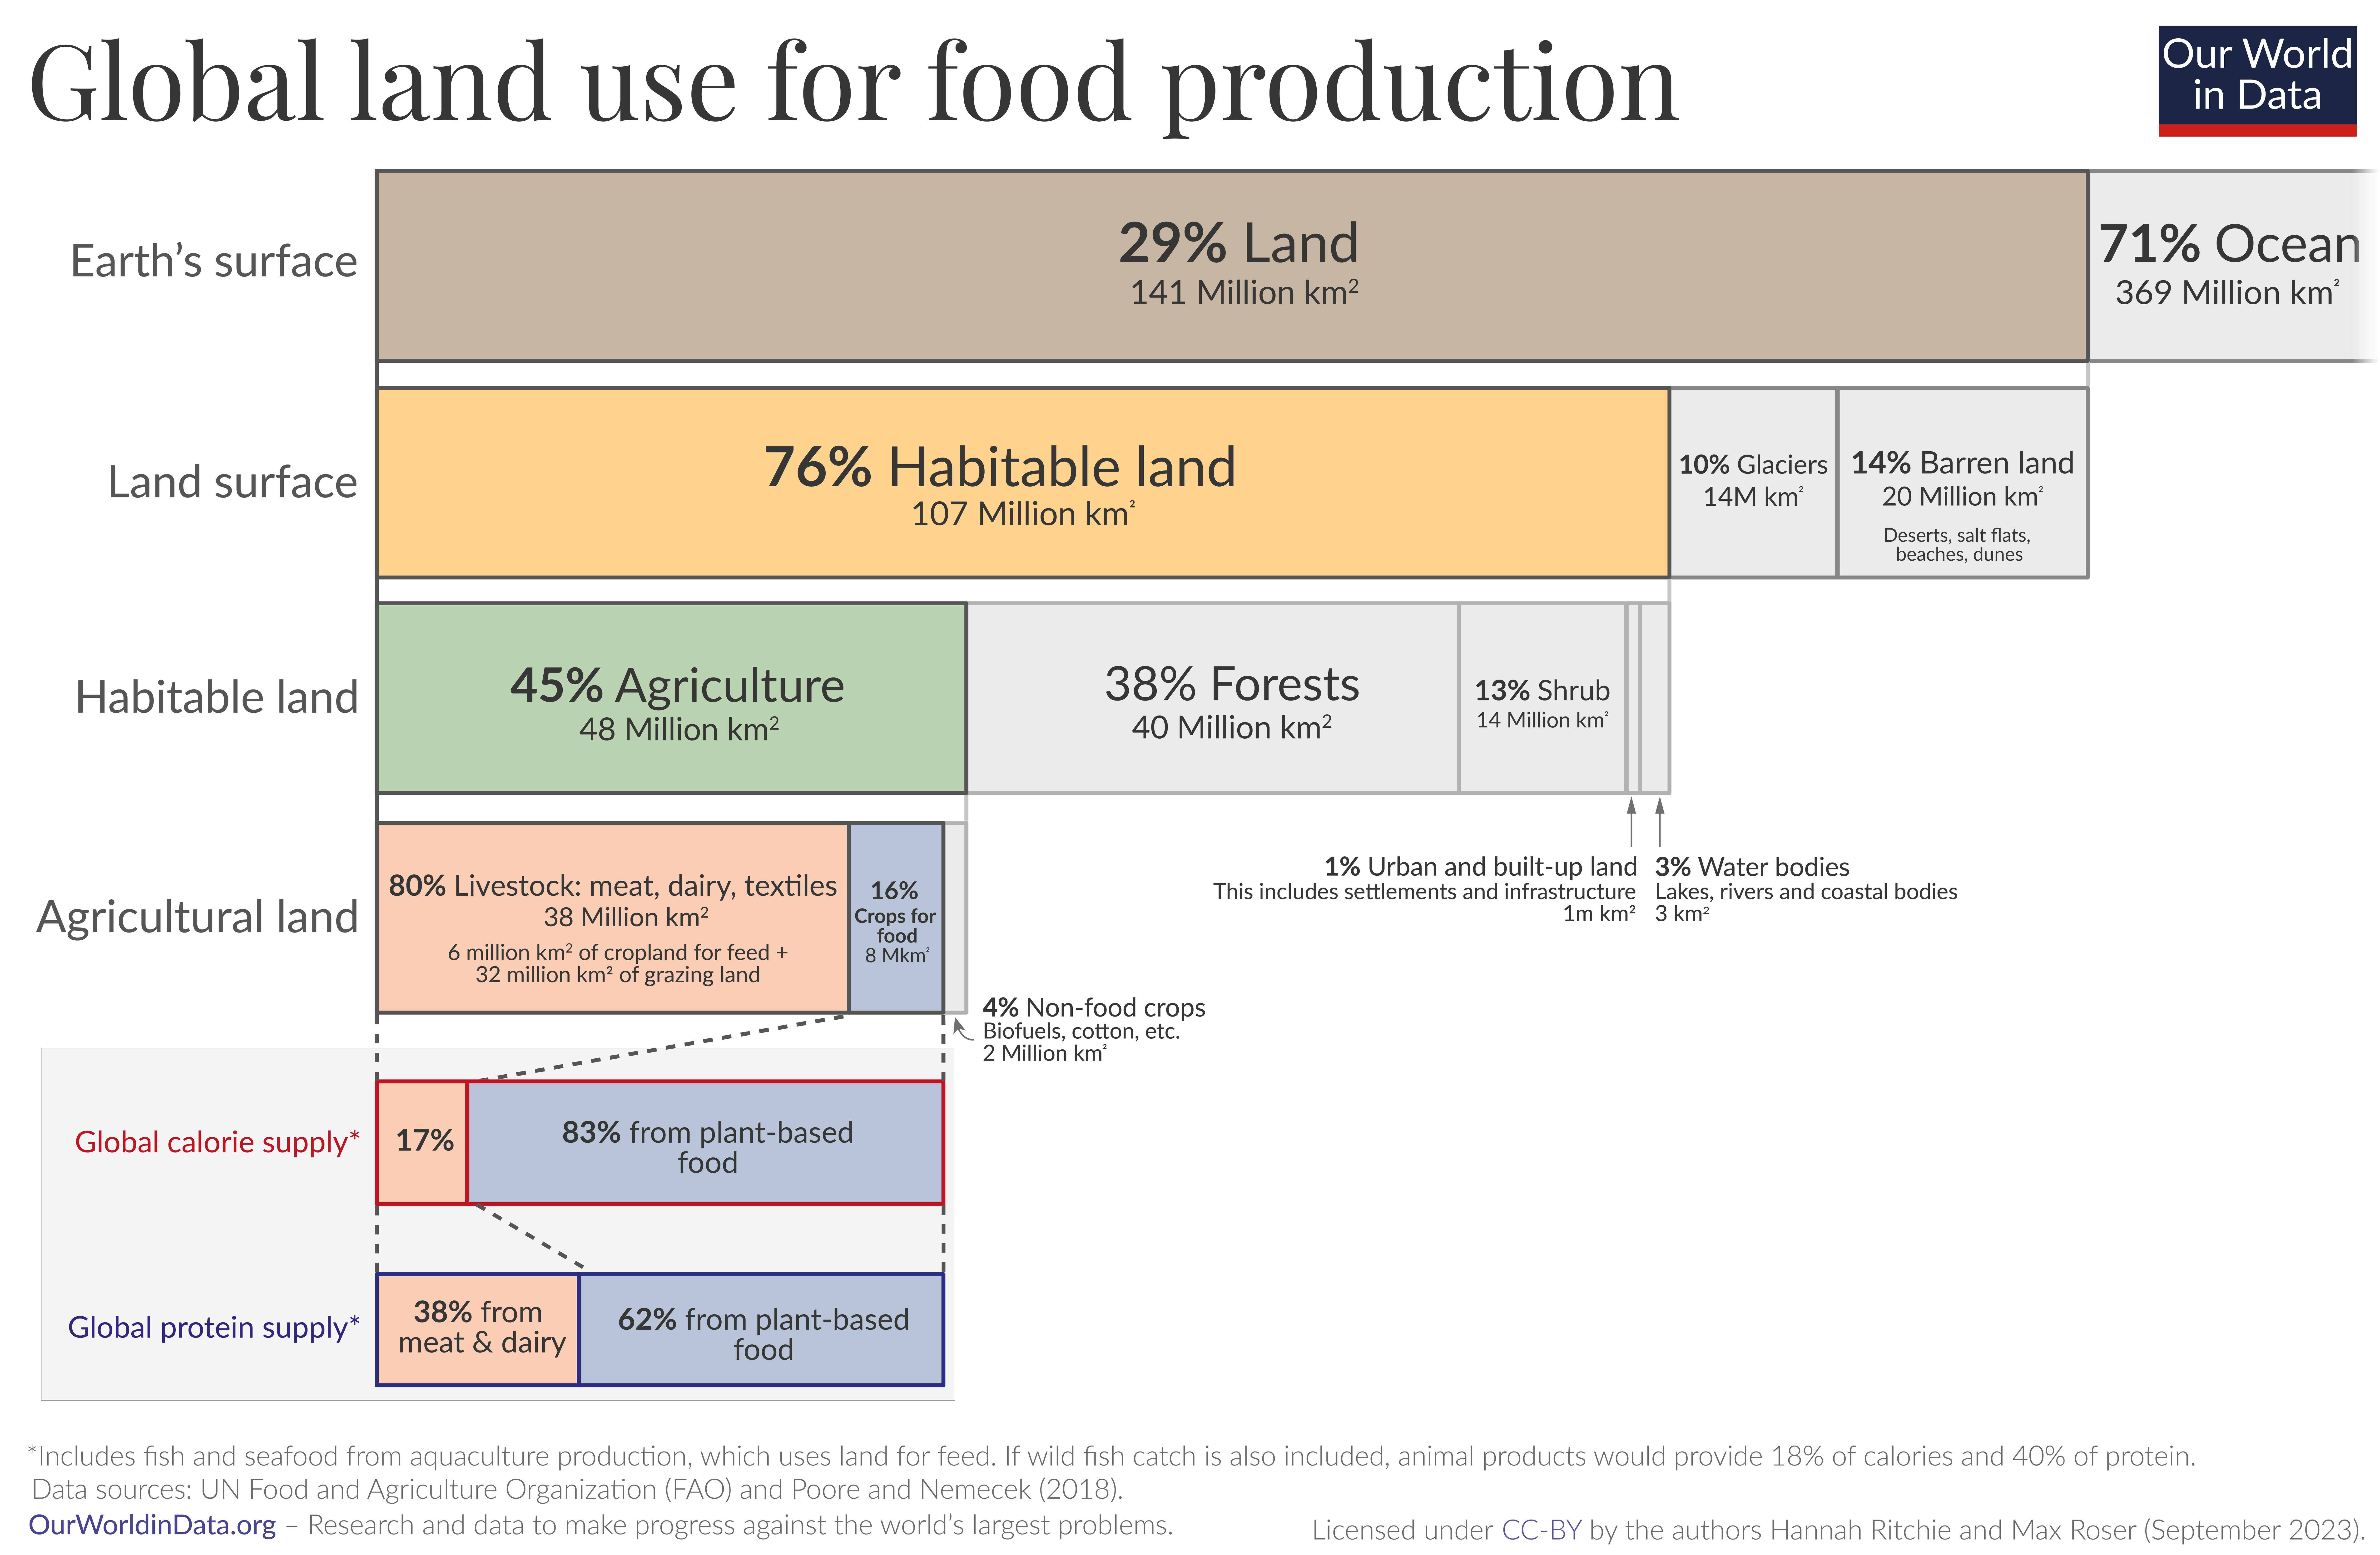 Series of 6 bar charts showing the breakdown of global land. 45% of habitable land is used for farming. 80% of this is for livestock.